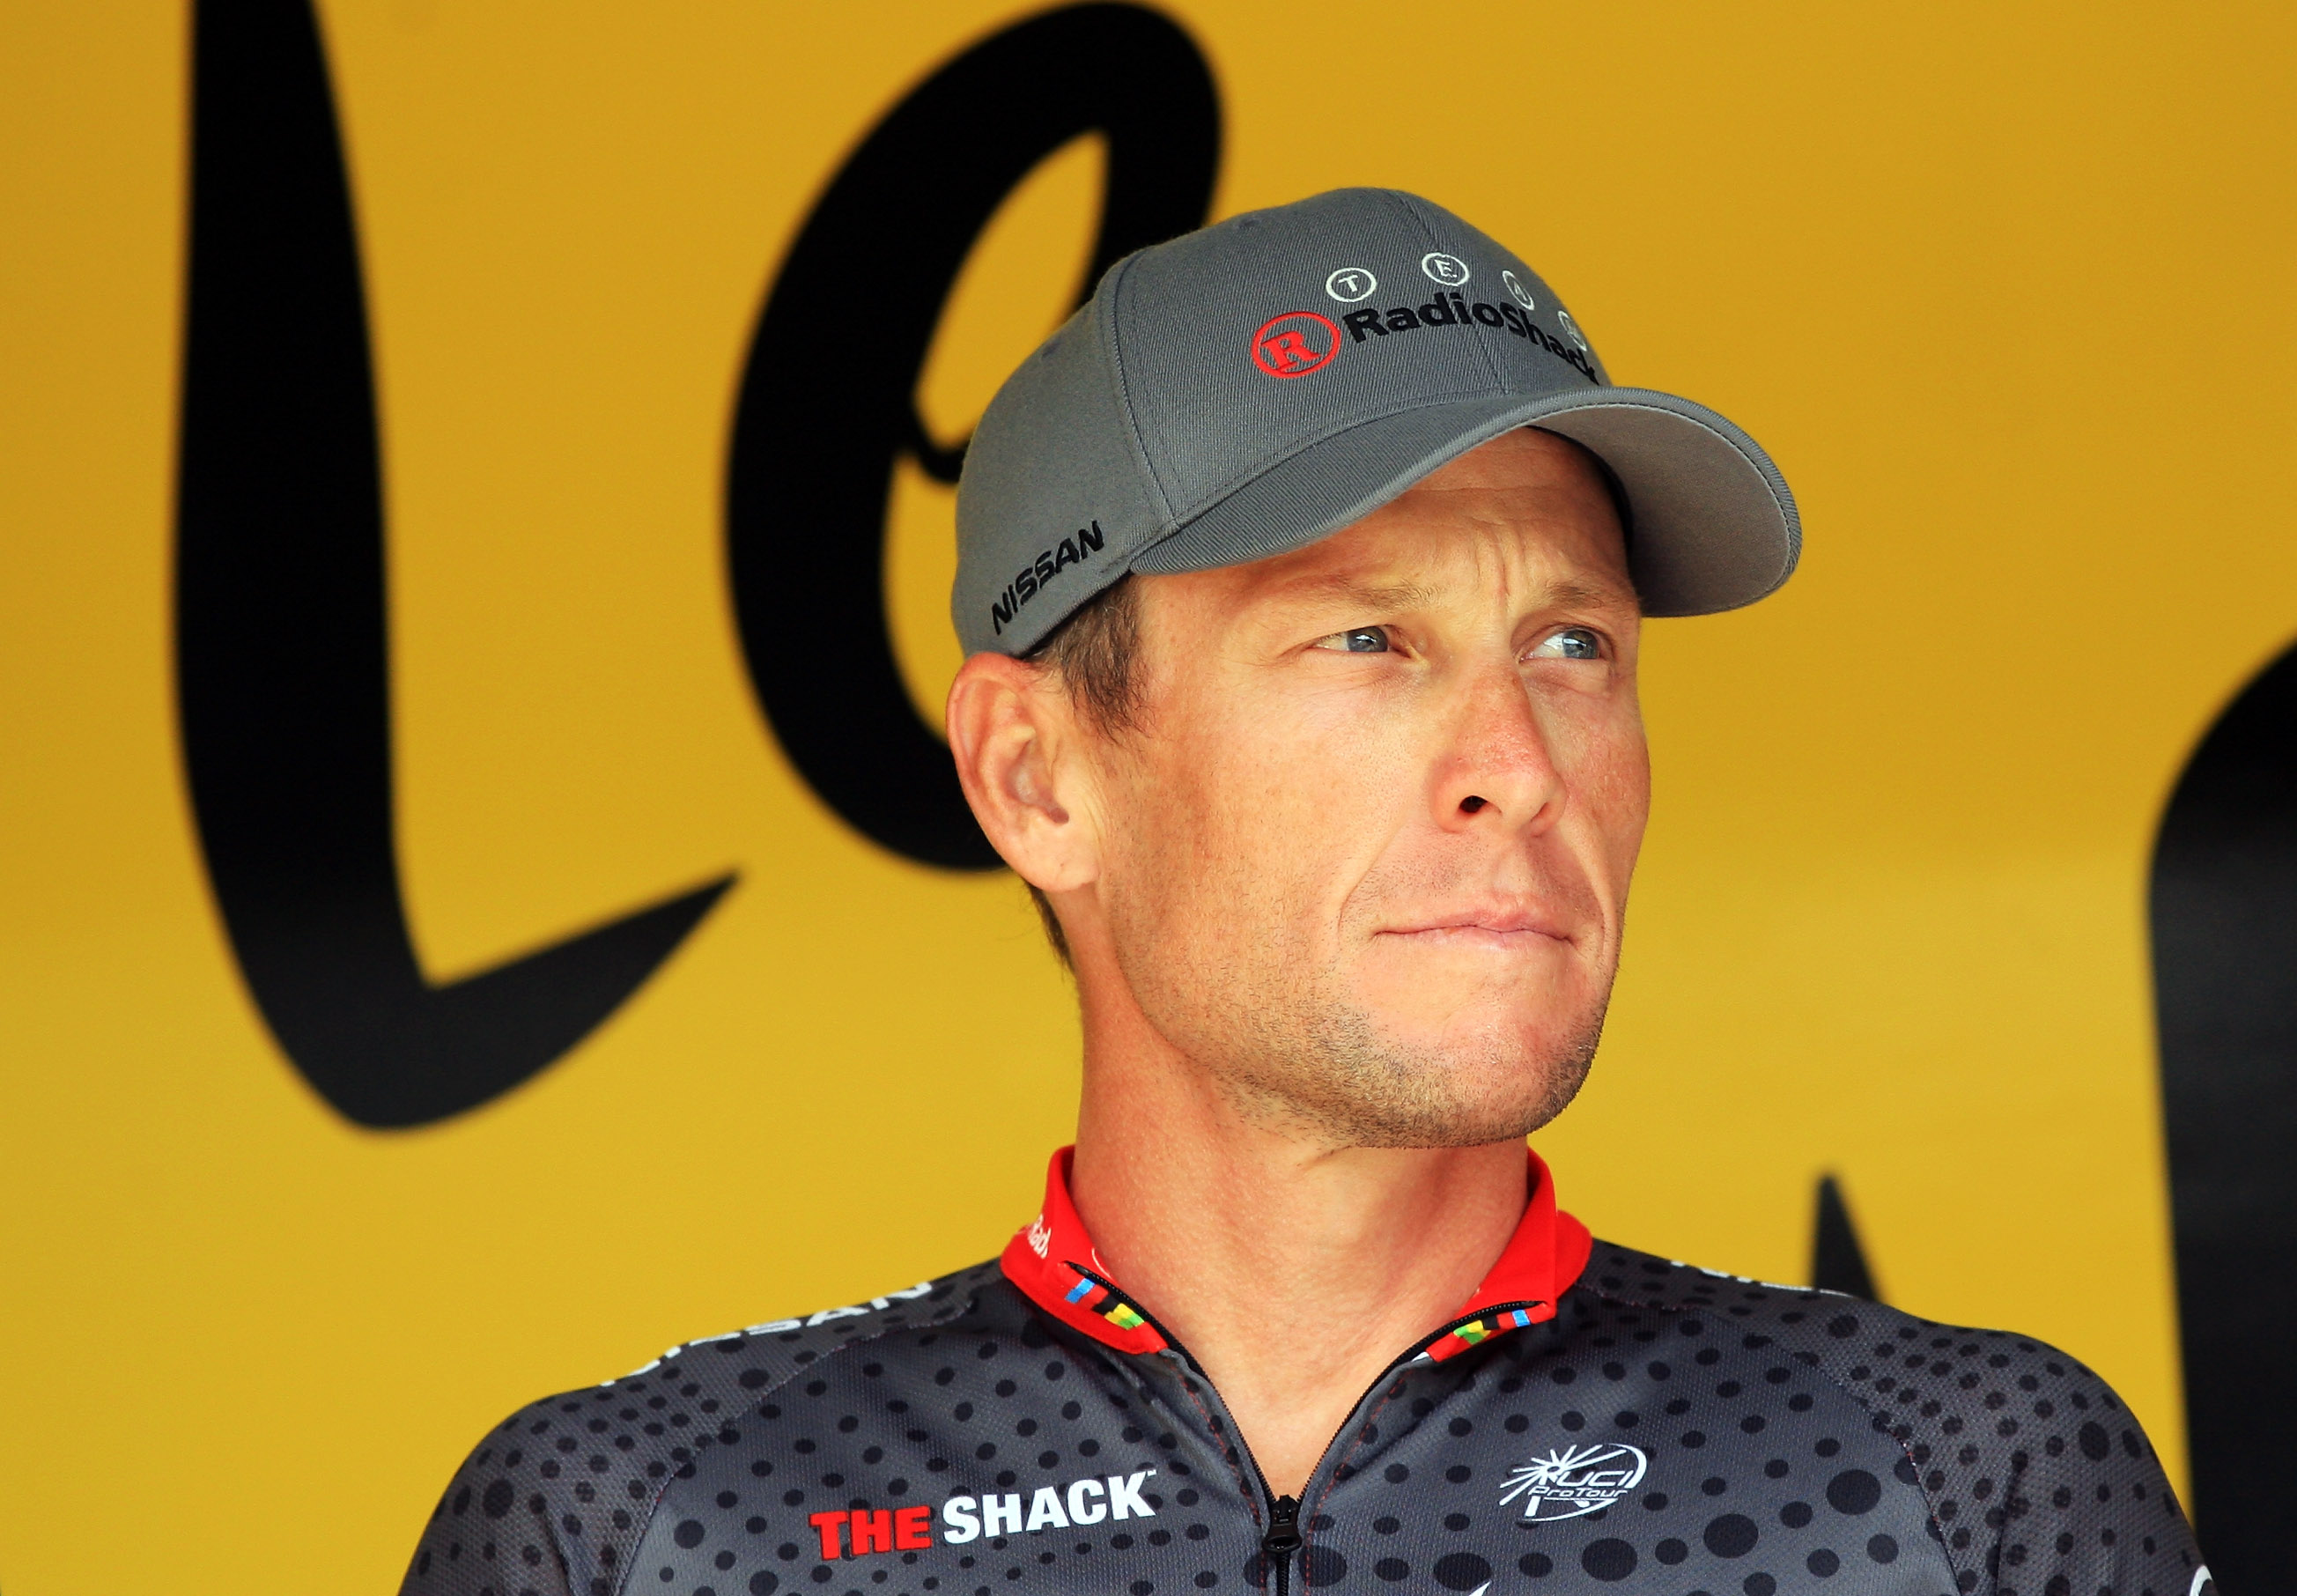 Lance Armstrong during stage twelve of the 2010 Tour de France from  Rodez to Revel on July 17, 2010 in Revel, France. (Bryn Lennon—2010 Getty Images)